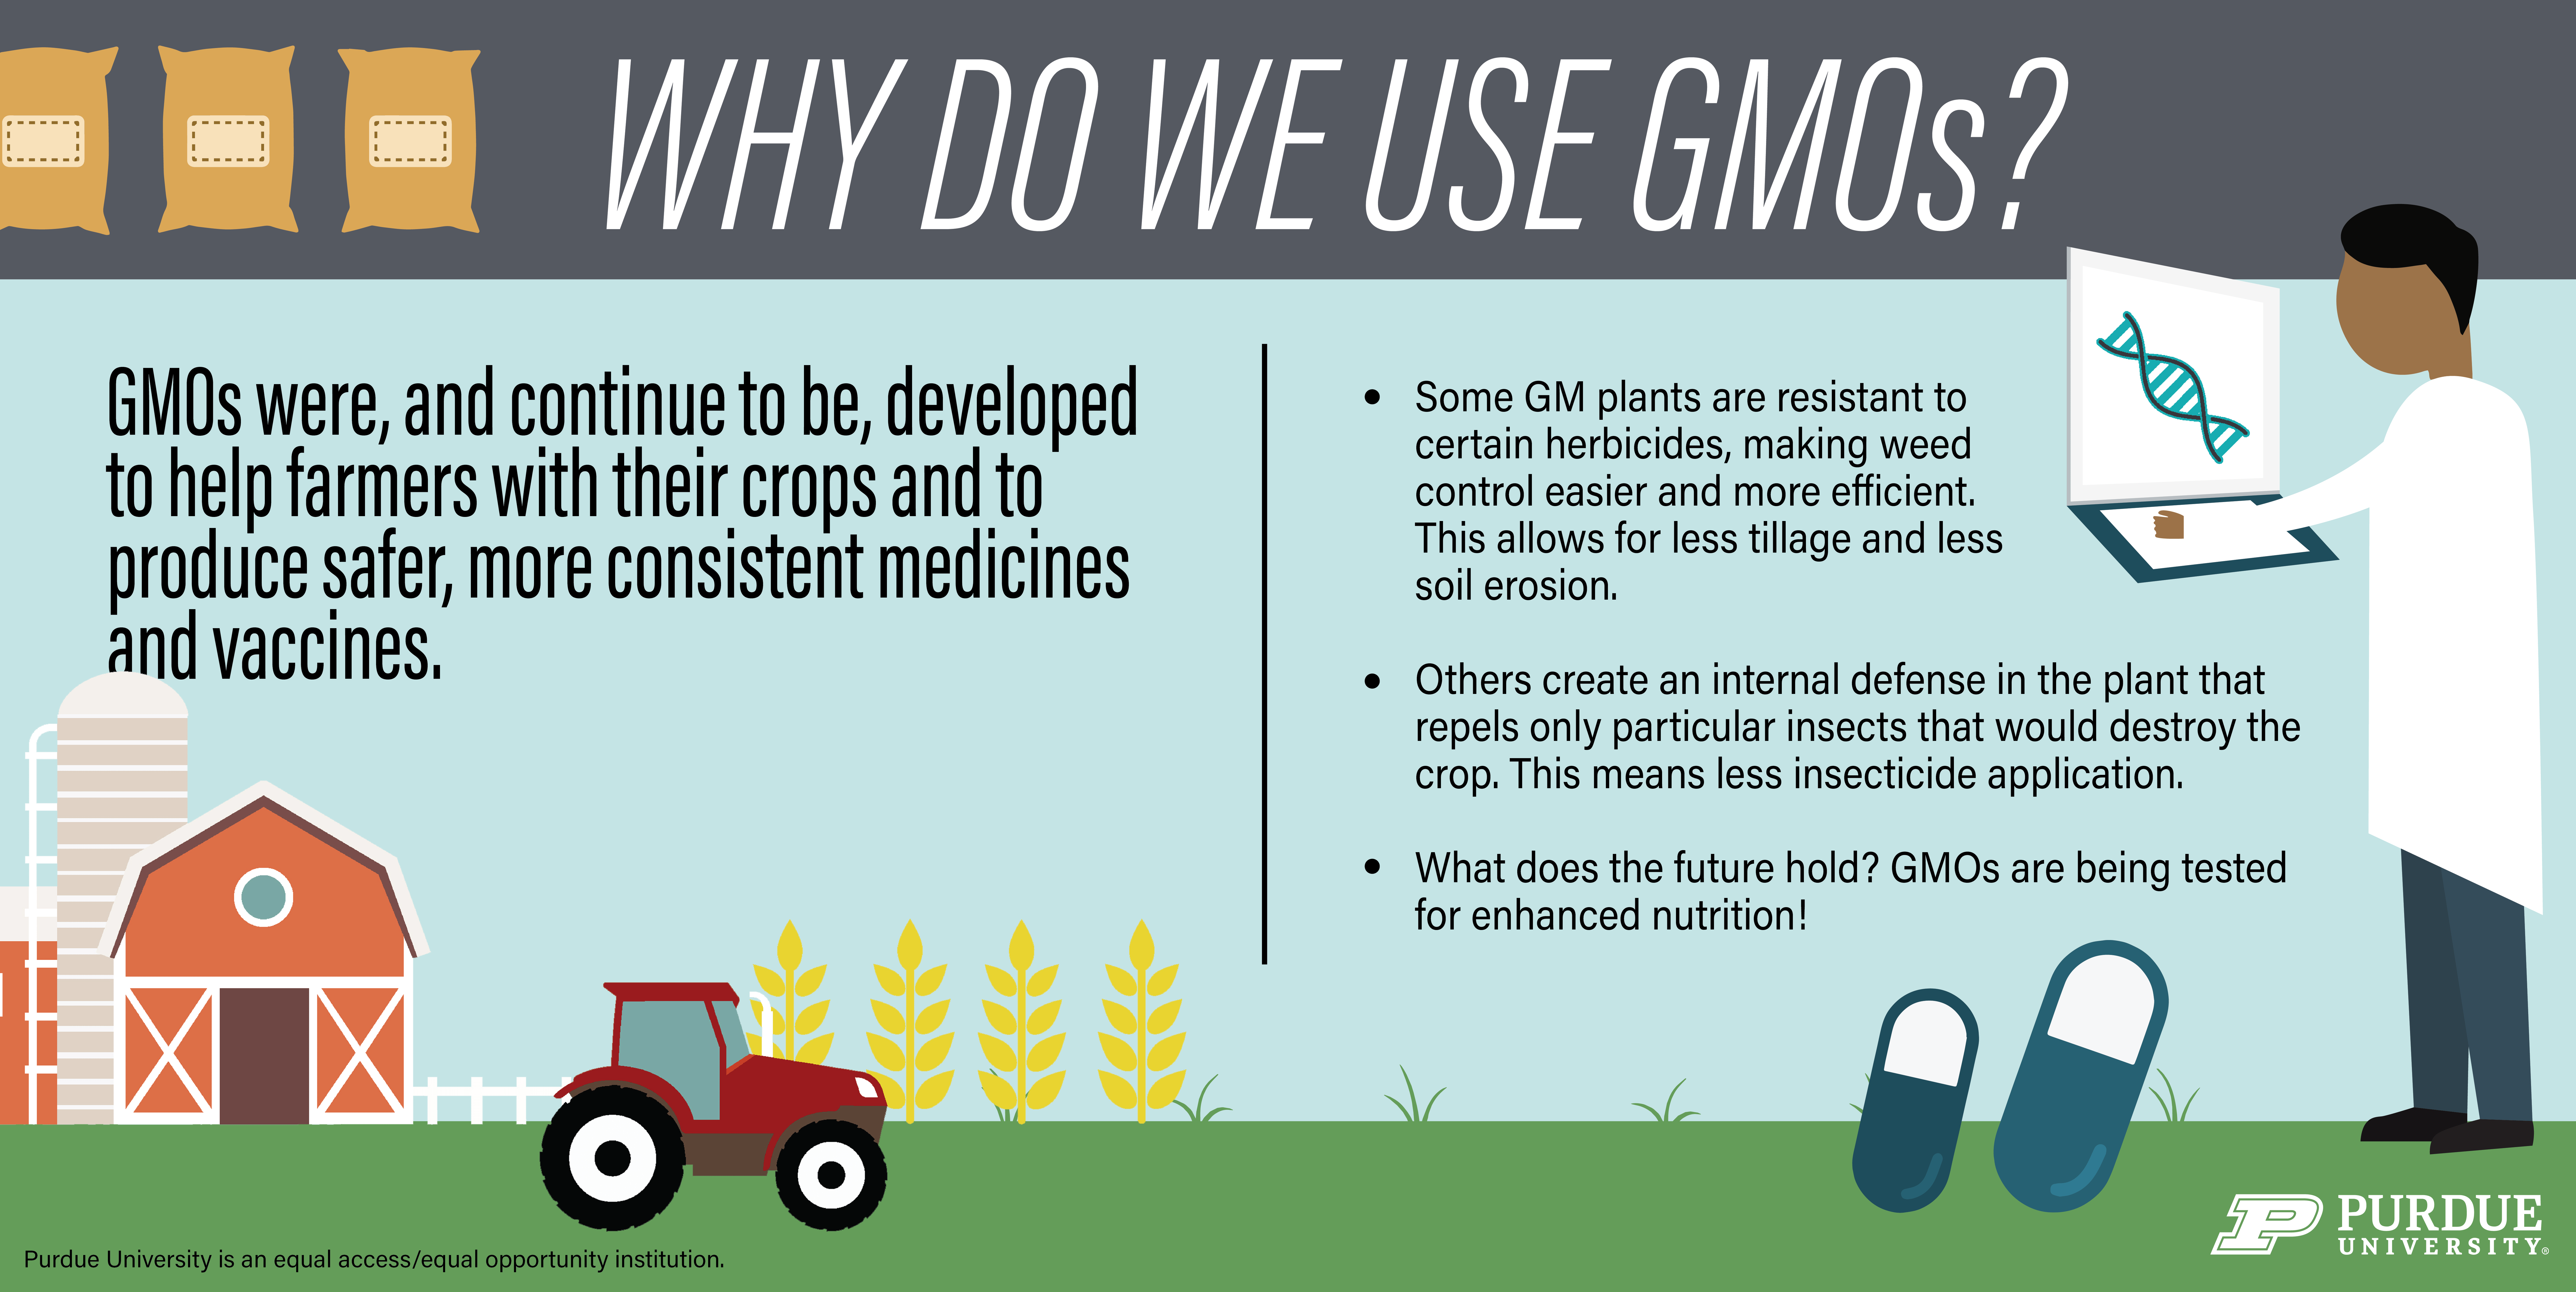 Why we use gmos graphic explanation. GMOs were, and continue to be, developed to help farmers with their crops and to produce safer, more consistent medicines and vaccines.